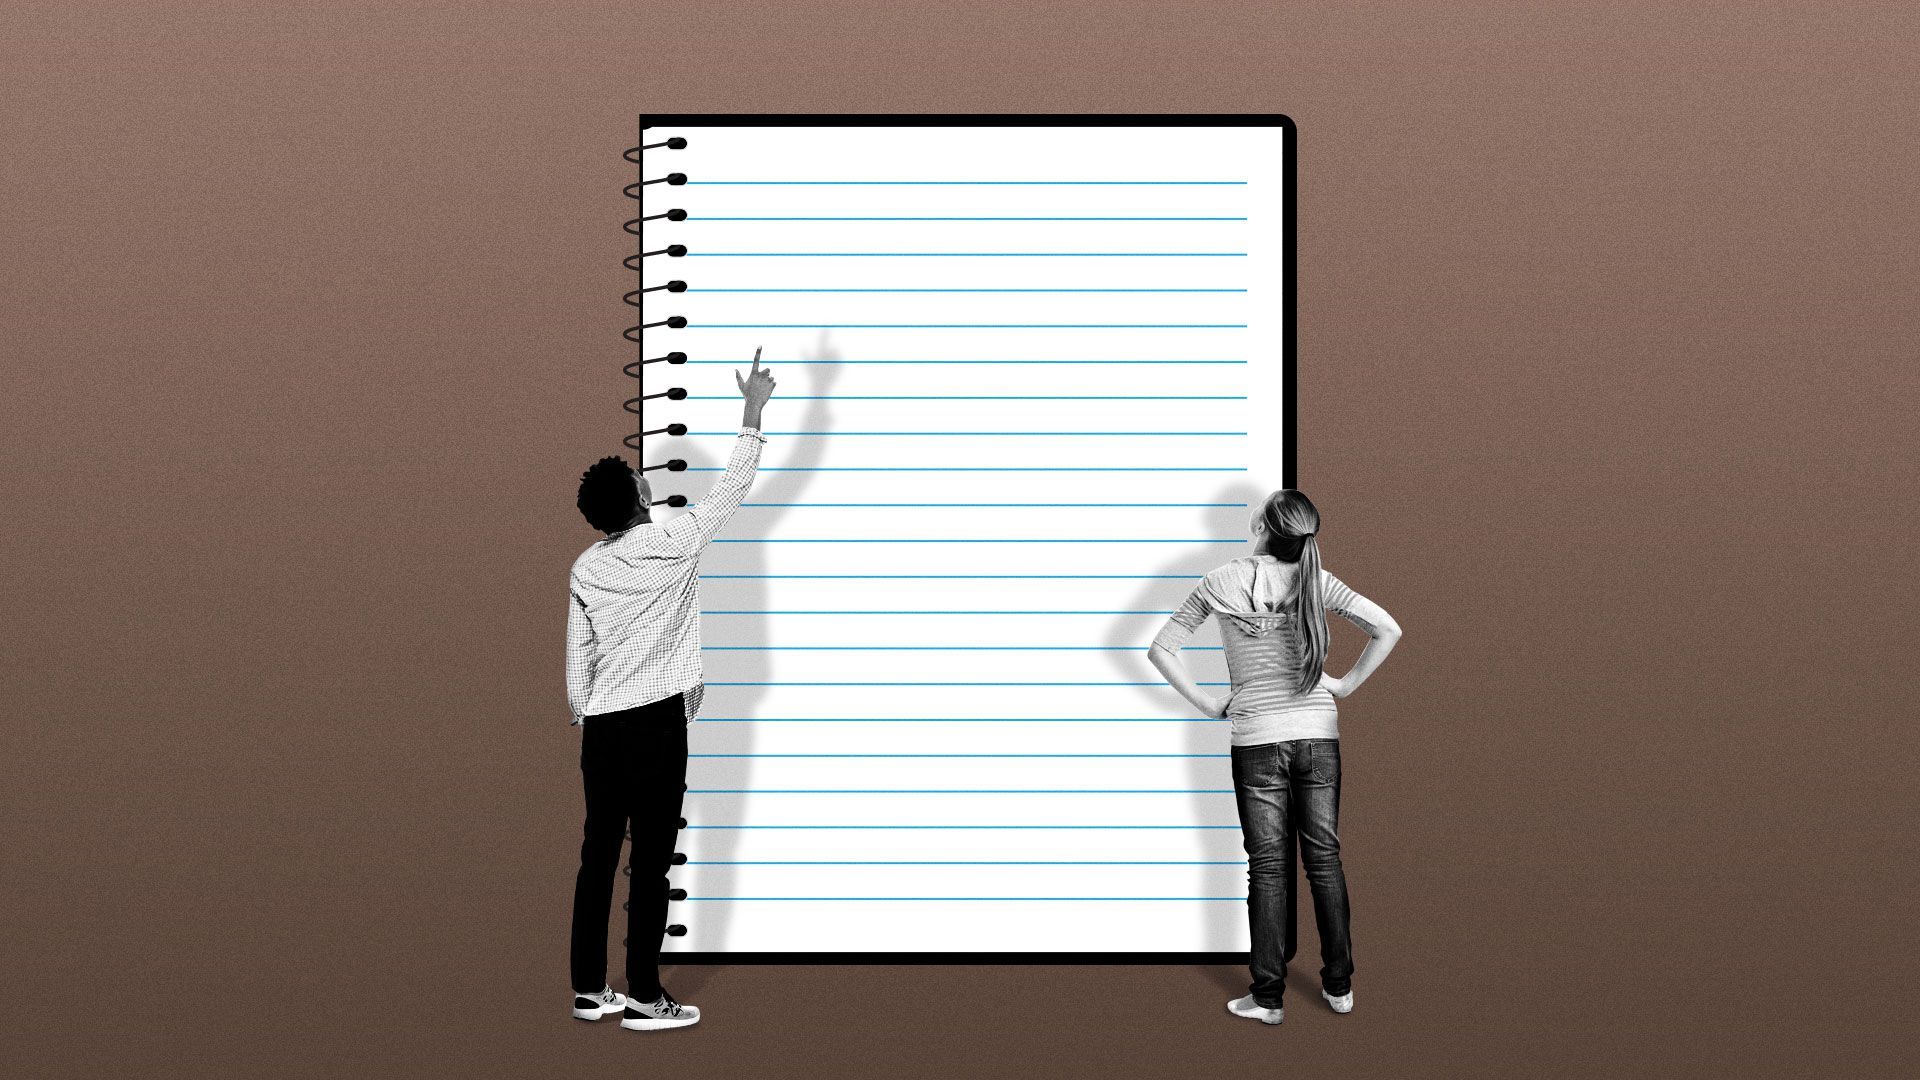 Illustration of two people divided by a school notebook, one black student pointing one while the white student looks up with arms on her hips